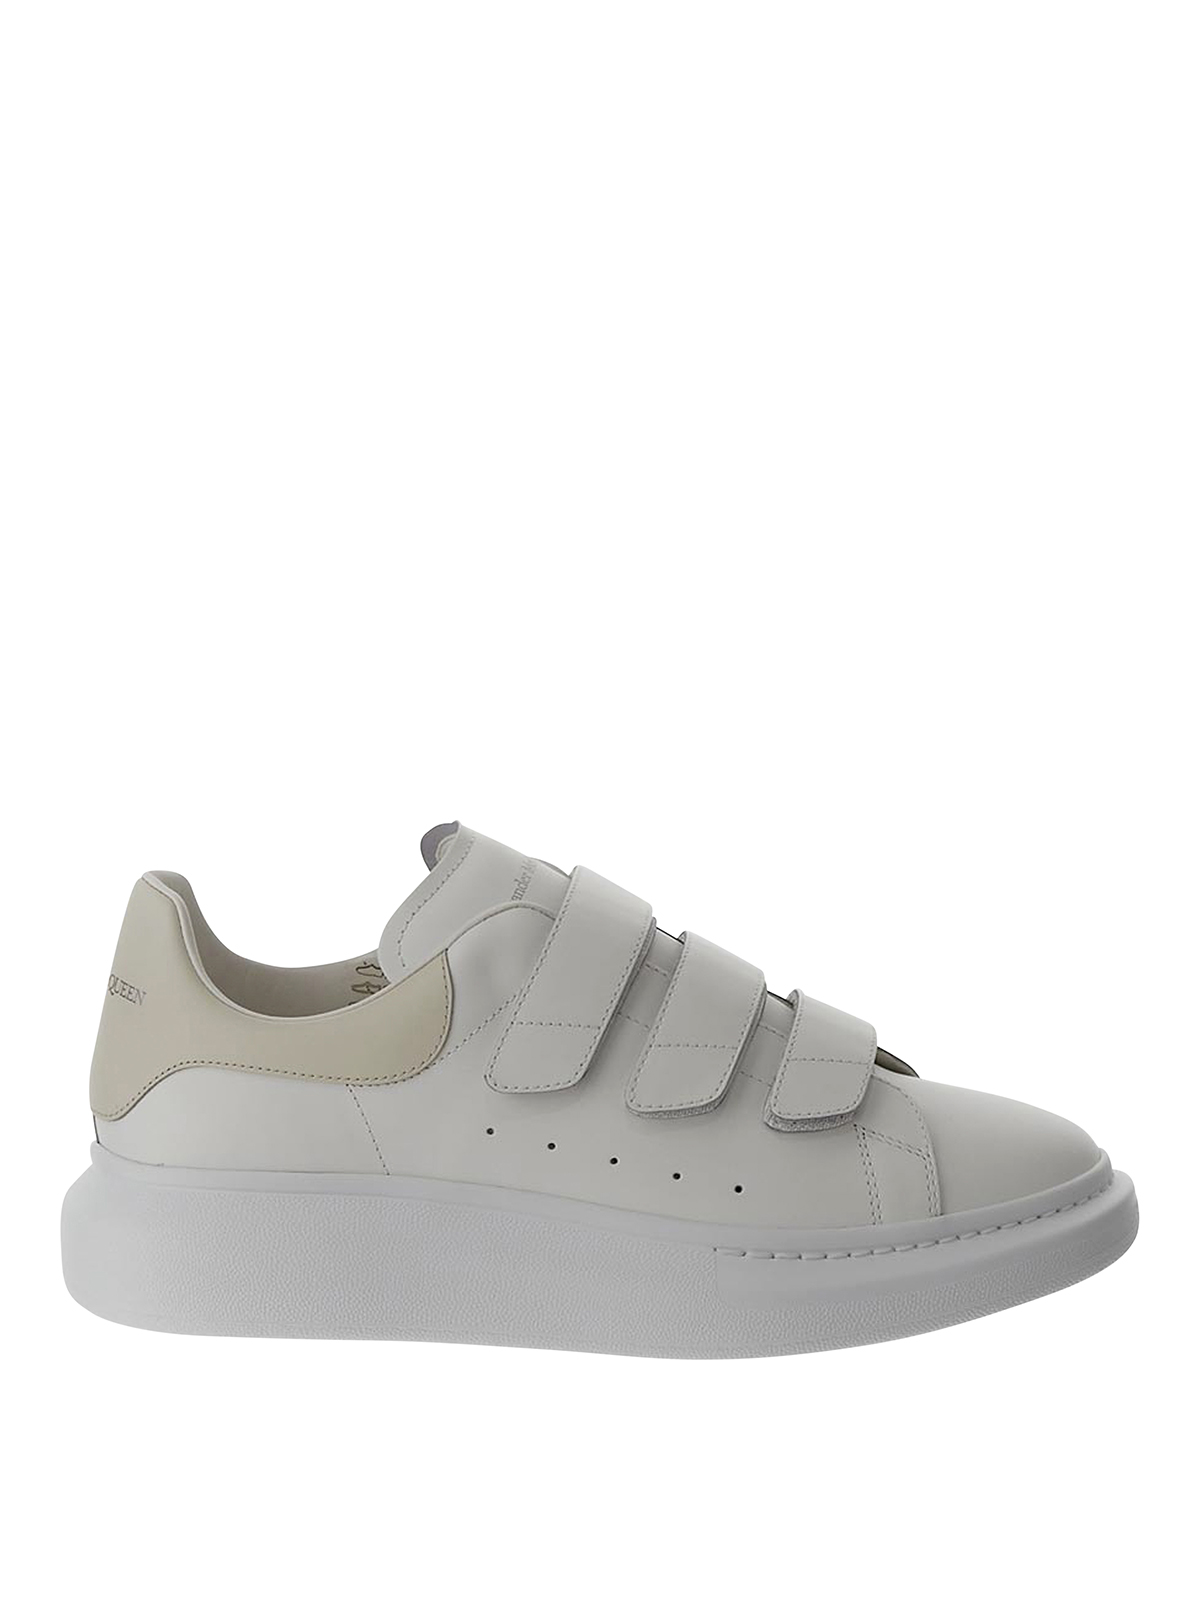 Alexander McQueen Leather Oversized Sneakers - White/Neon Pink | Garmentory